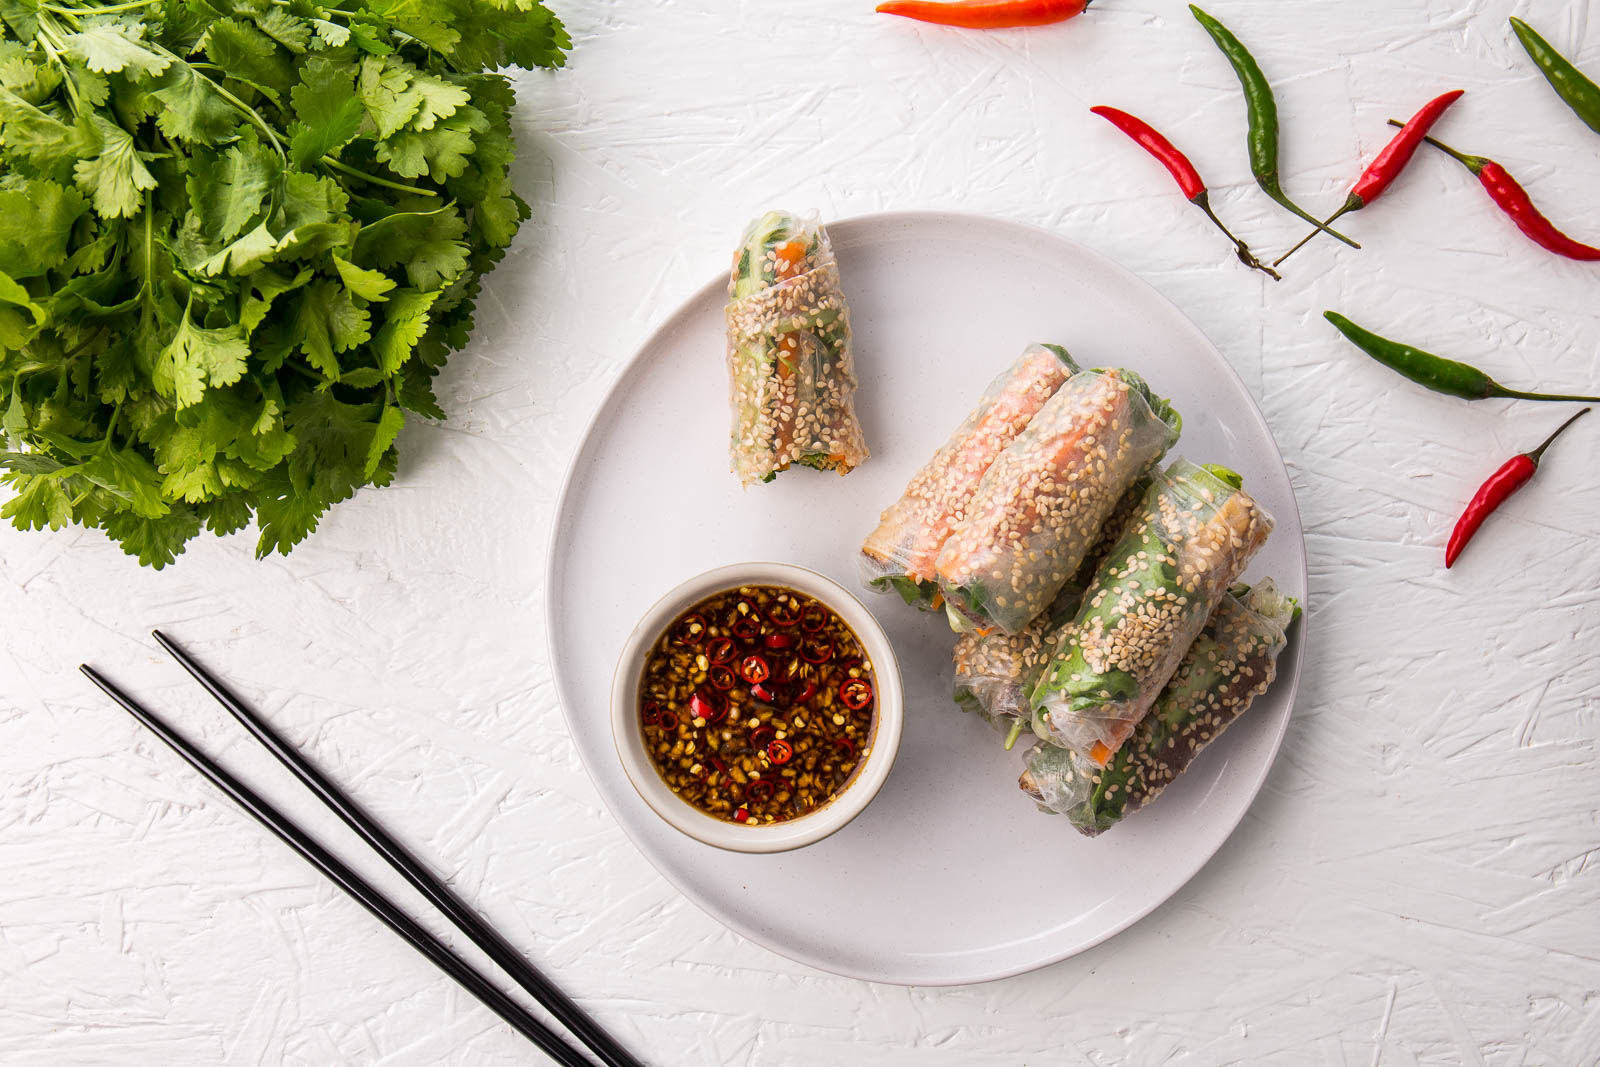 10 Easy Steps to Making Delicious Tofu Summer Rolls